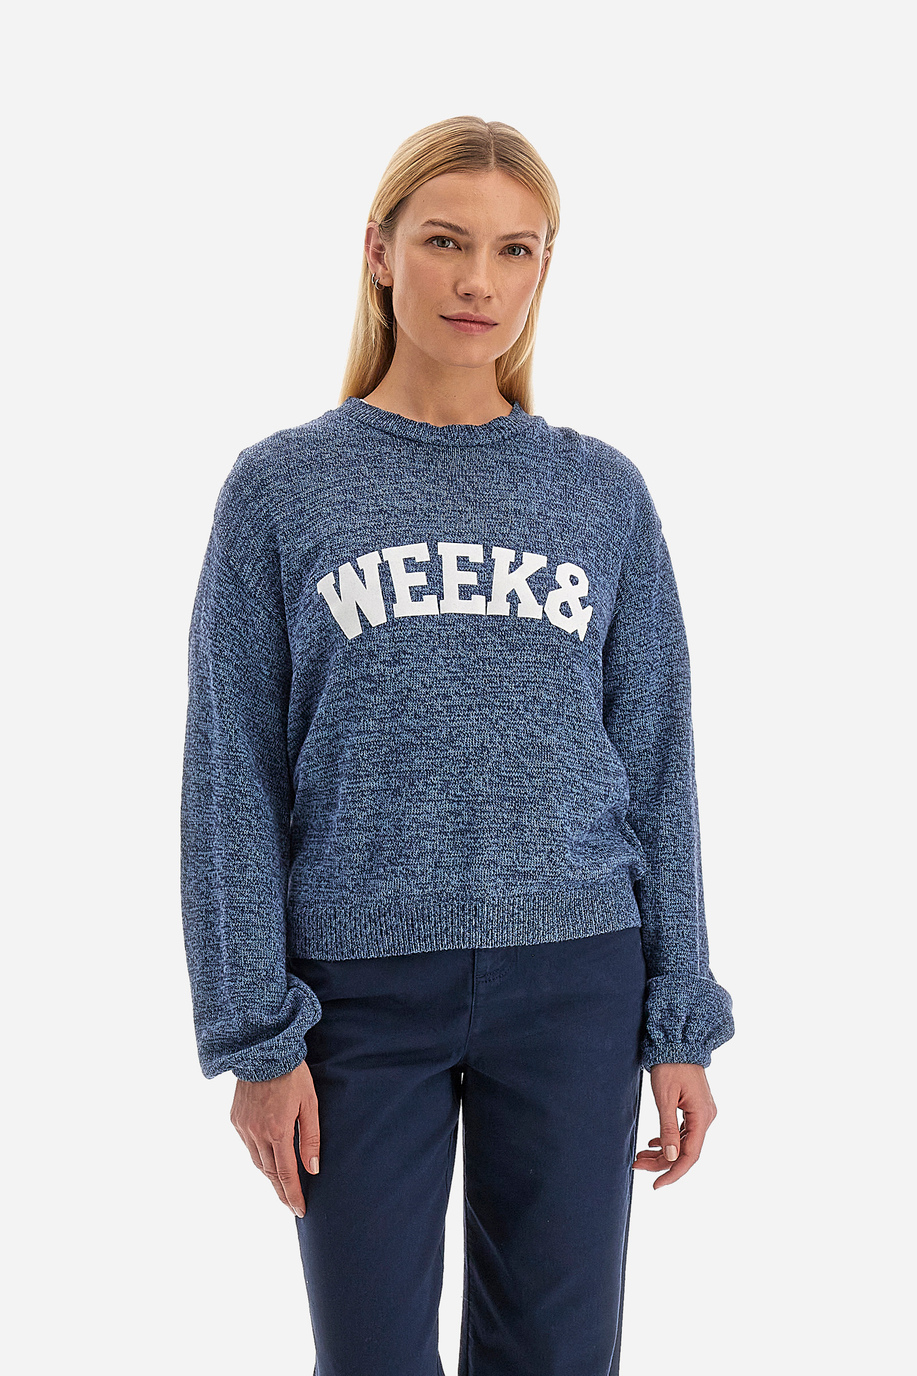 Women's round-neck long-sleeved sweater with Spring Weekend logo - Videl - Sweatshirts | La Martina - Official Online Shop